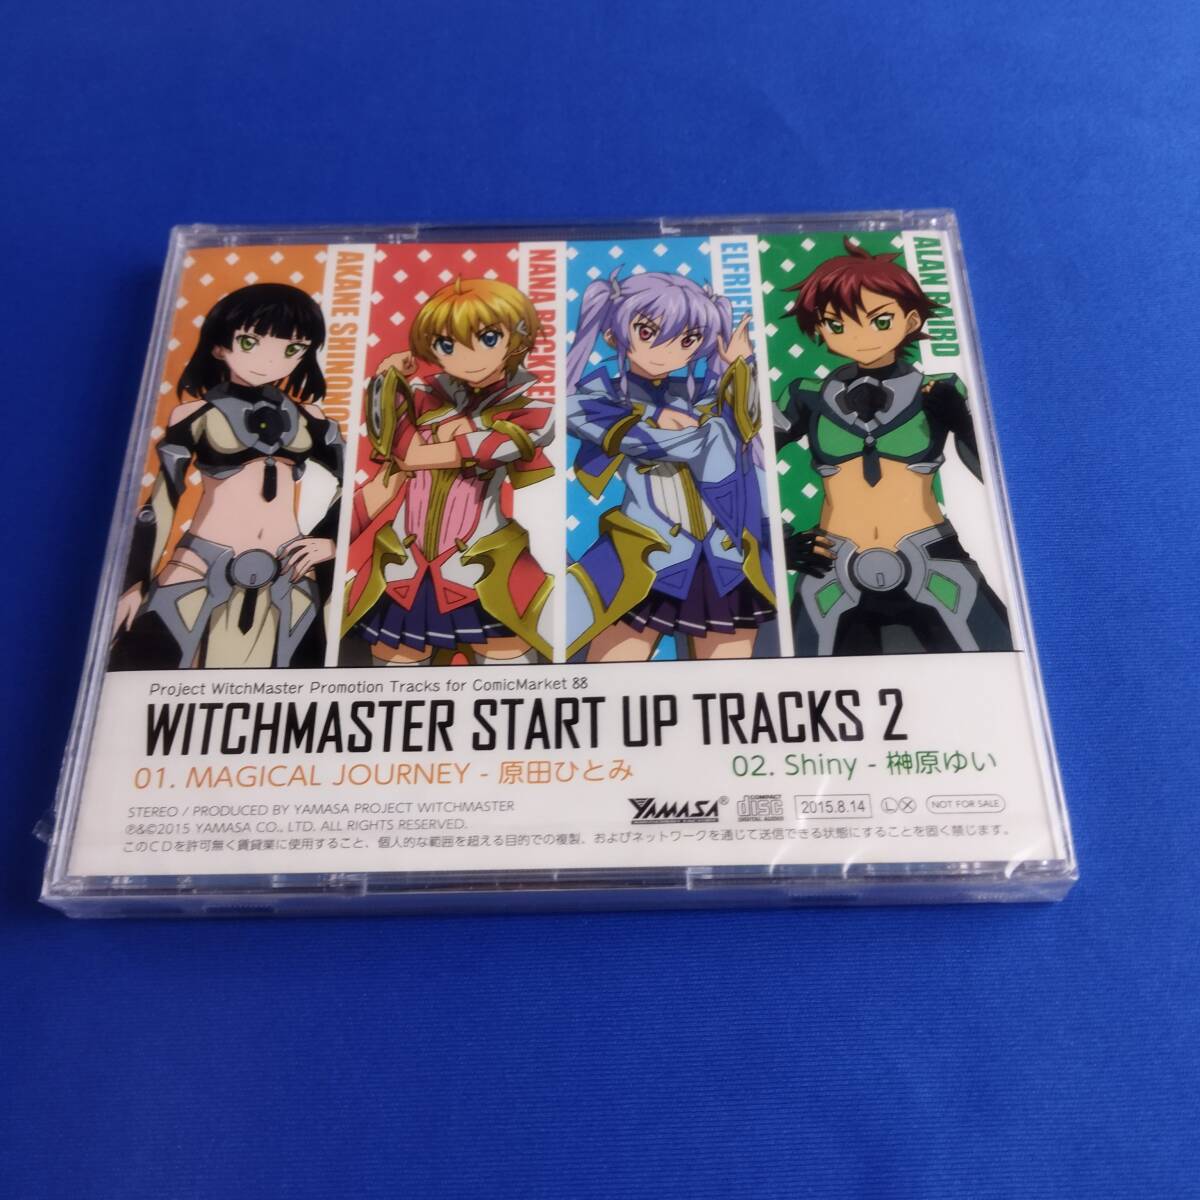 1SC5 未開封 CD WITCHMASTER START UP TRACKS 2 MAGICAL JOURNEY Shiny ヤマサ パチスロ 音楽の画像2